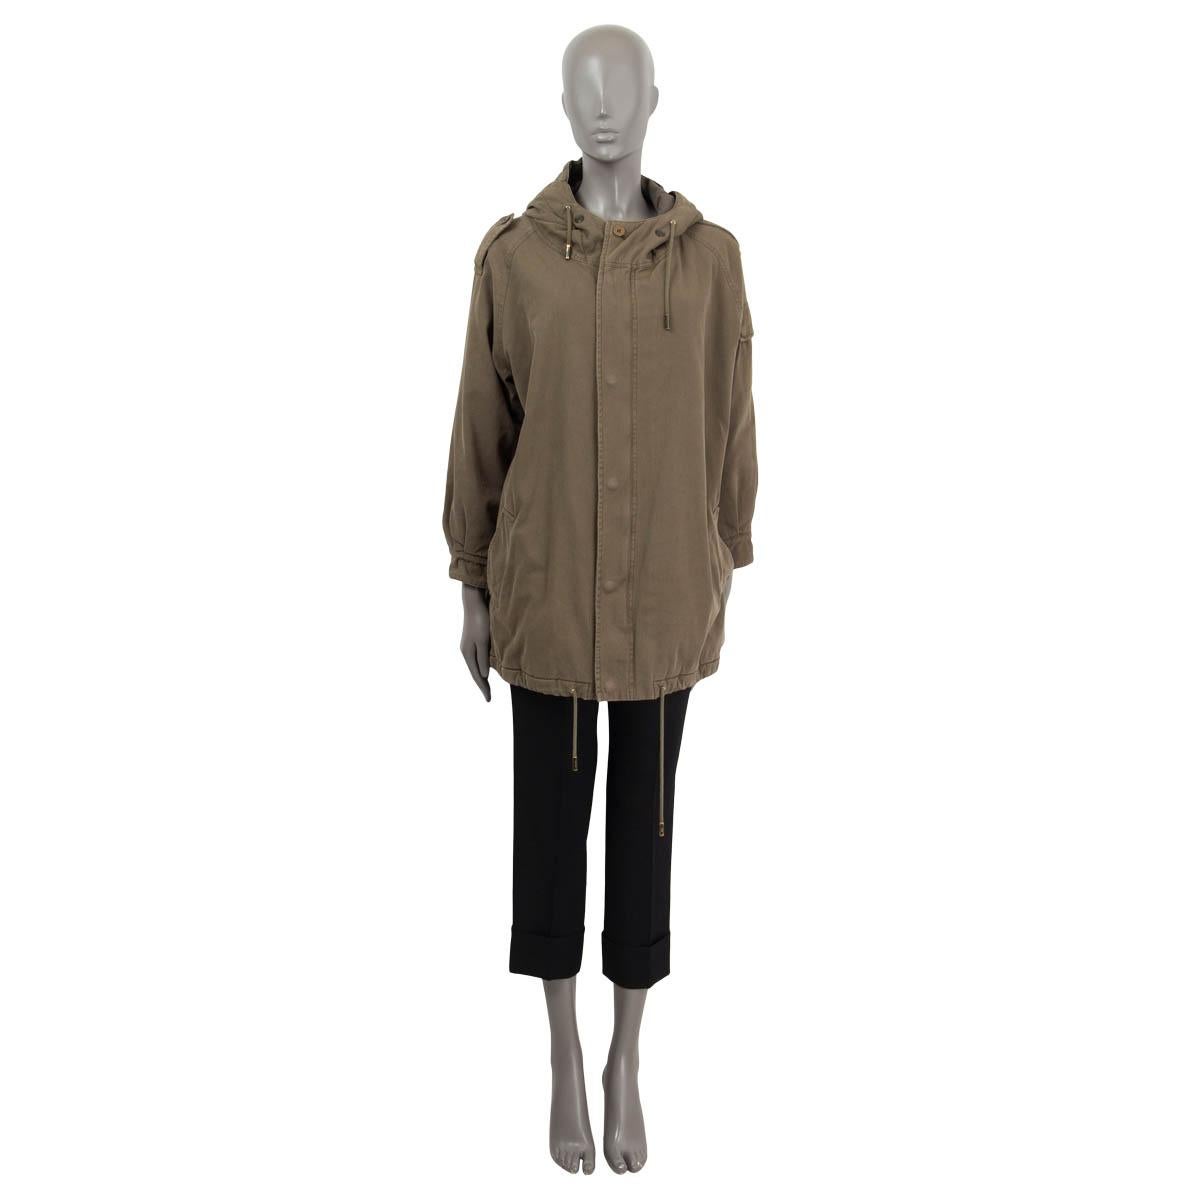 100% authentic Saint Laurent 2015 oversized parka in olive green cotton (100%). Features raglan long sleeves (sleeve measurements taken from the neck), epaulettes at the shoulders and buttoned cuffs. Opens with push buttons and a zipper on the